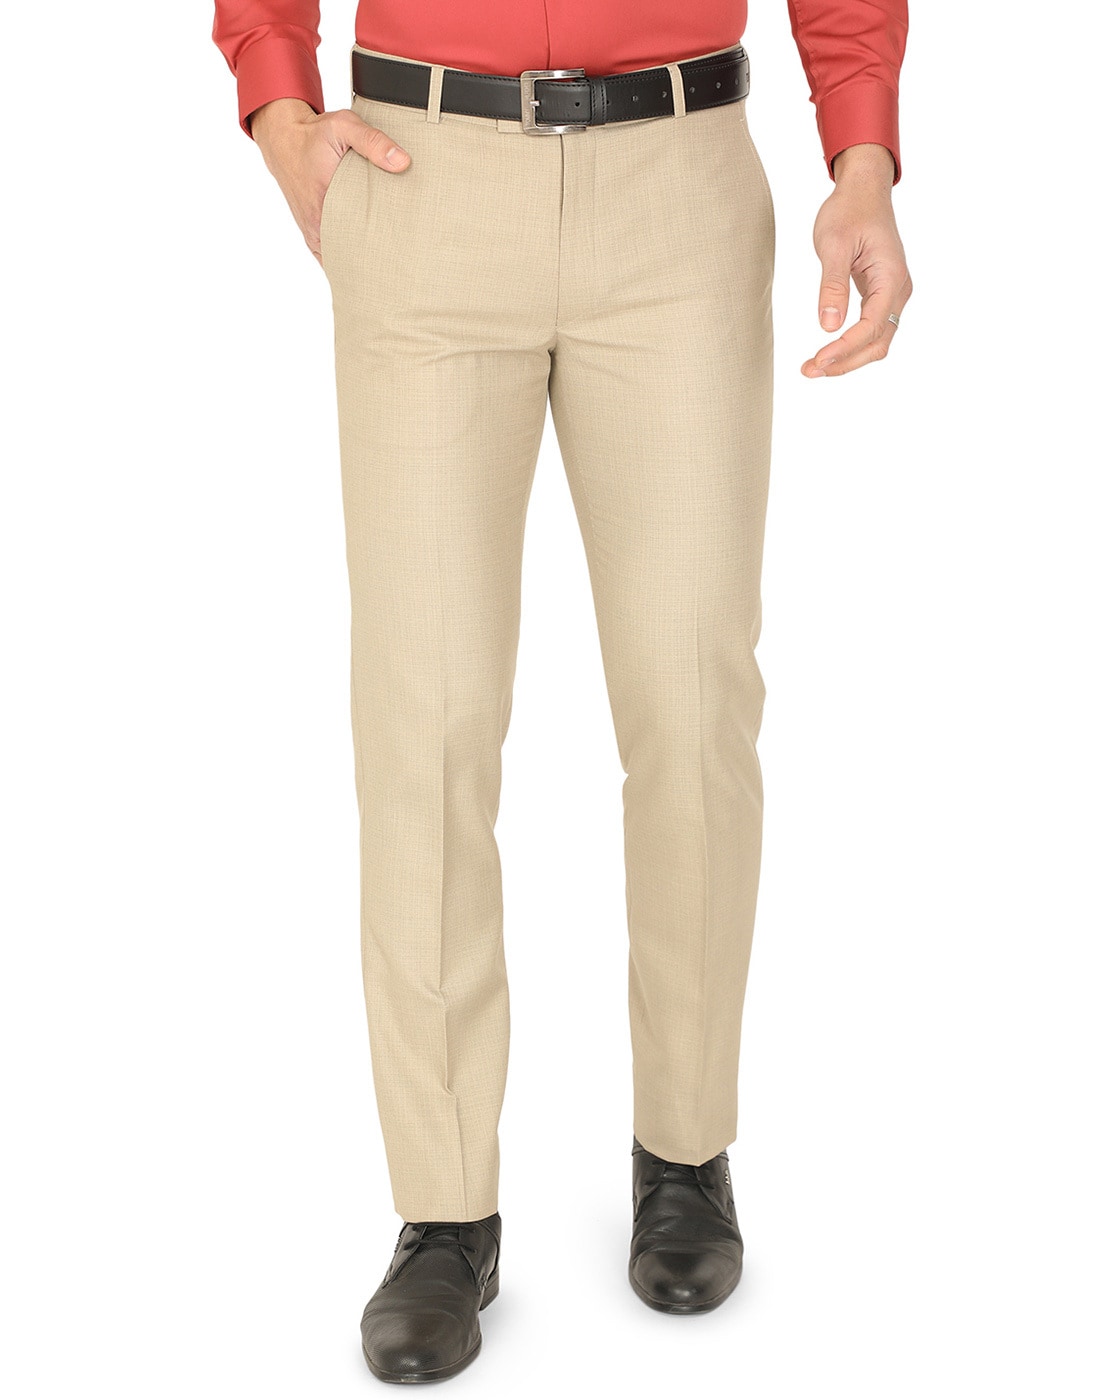 GreenFibre Khaki Slim Fit Trousers  Buy GreenFibre Khaki Slim Fit  Trousers Online at Low Price in India  Snapdeal